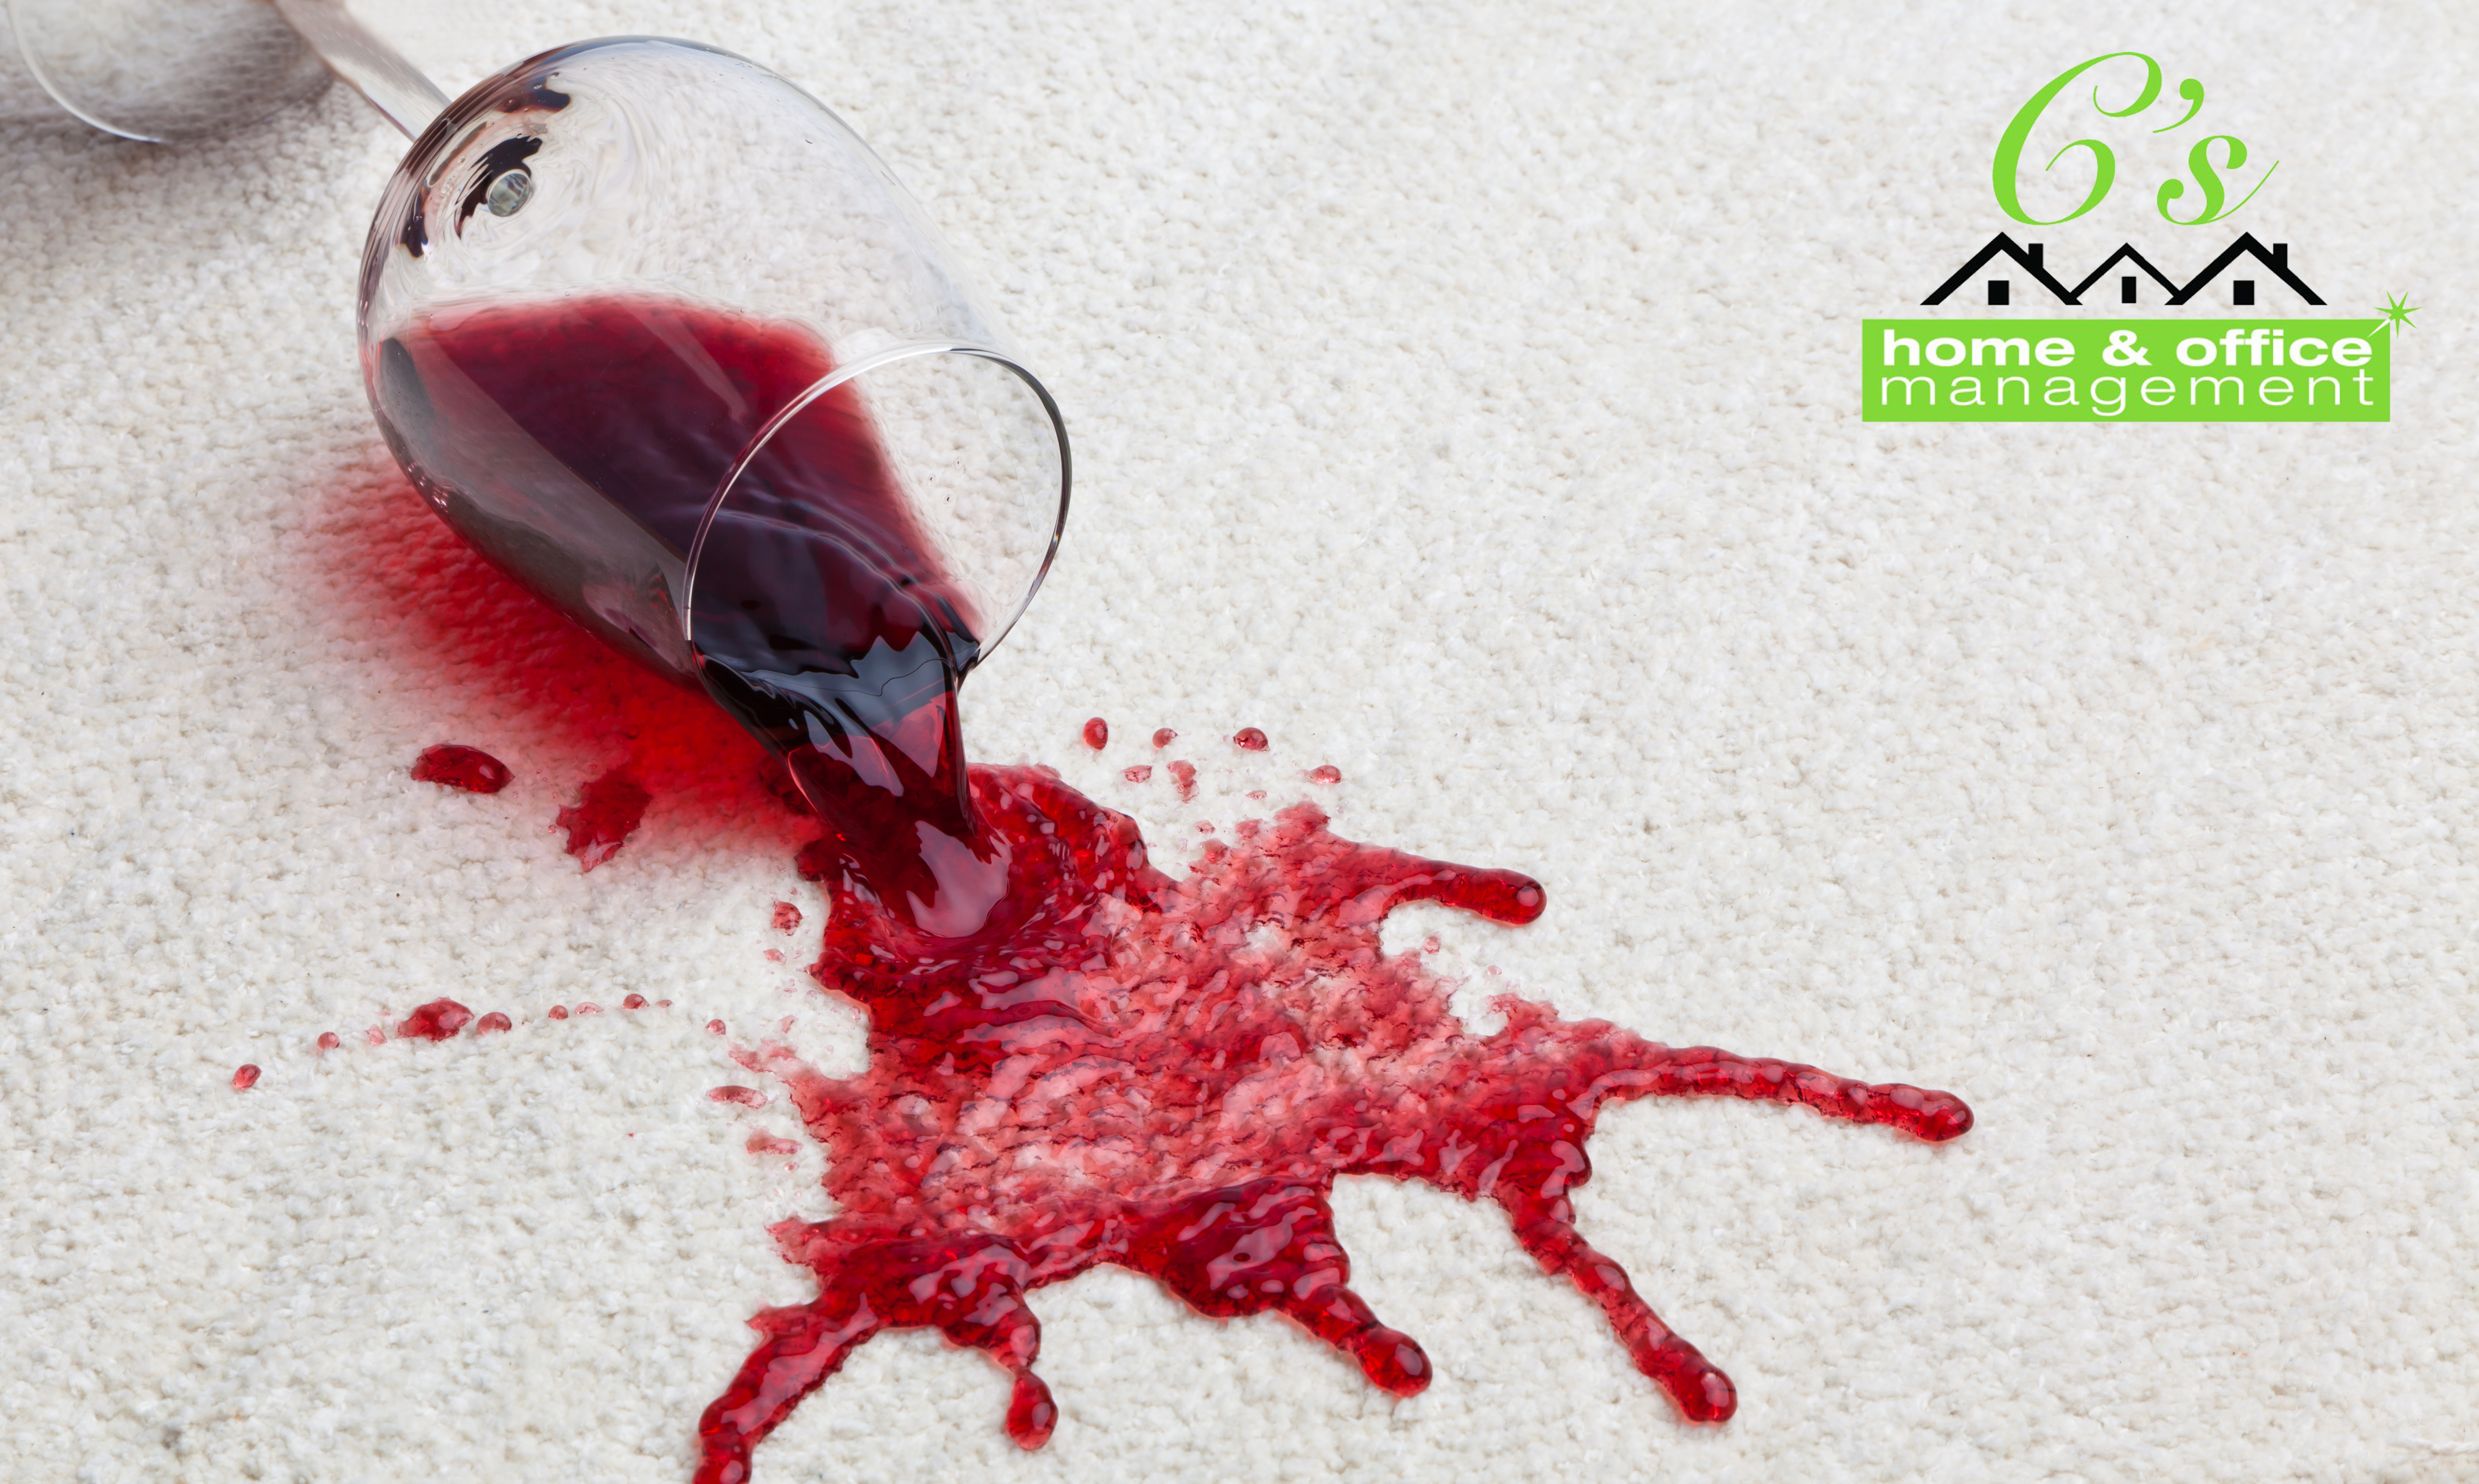 Glass of wine spilled